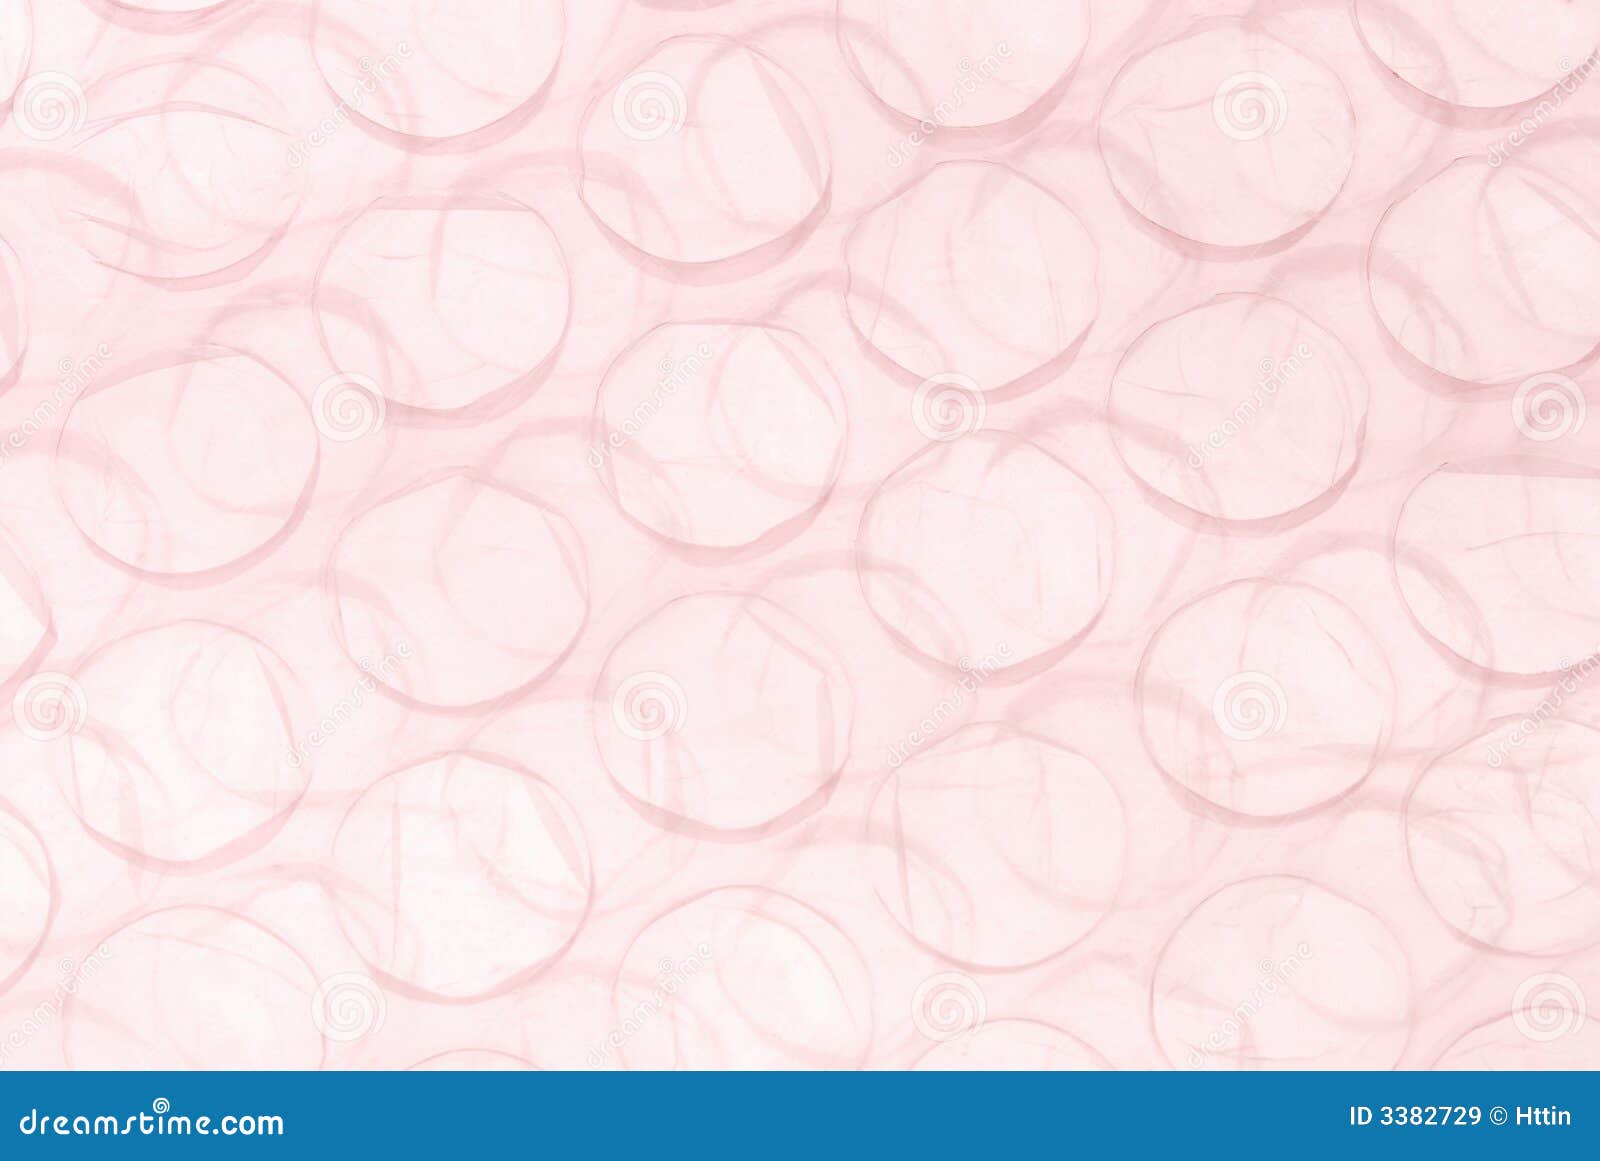 Pink bubble background stock image. Image of circle, page - 3382729